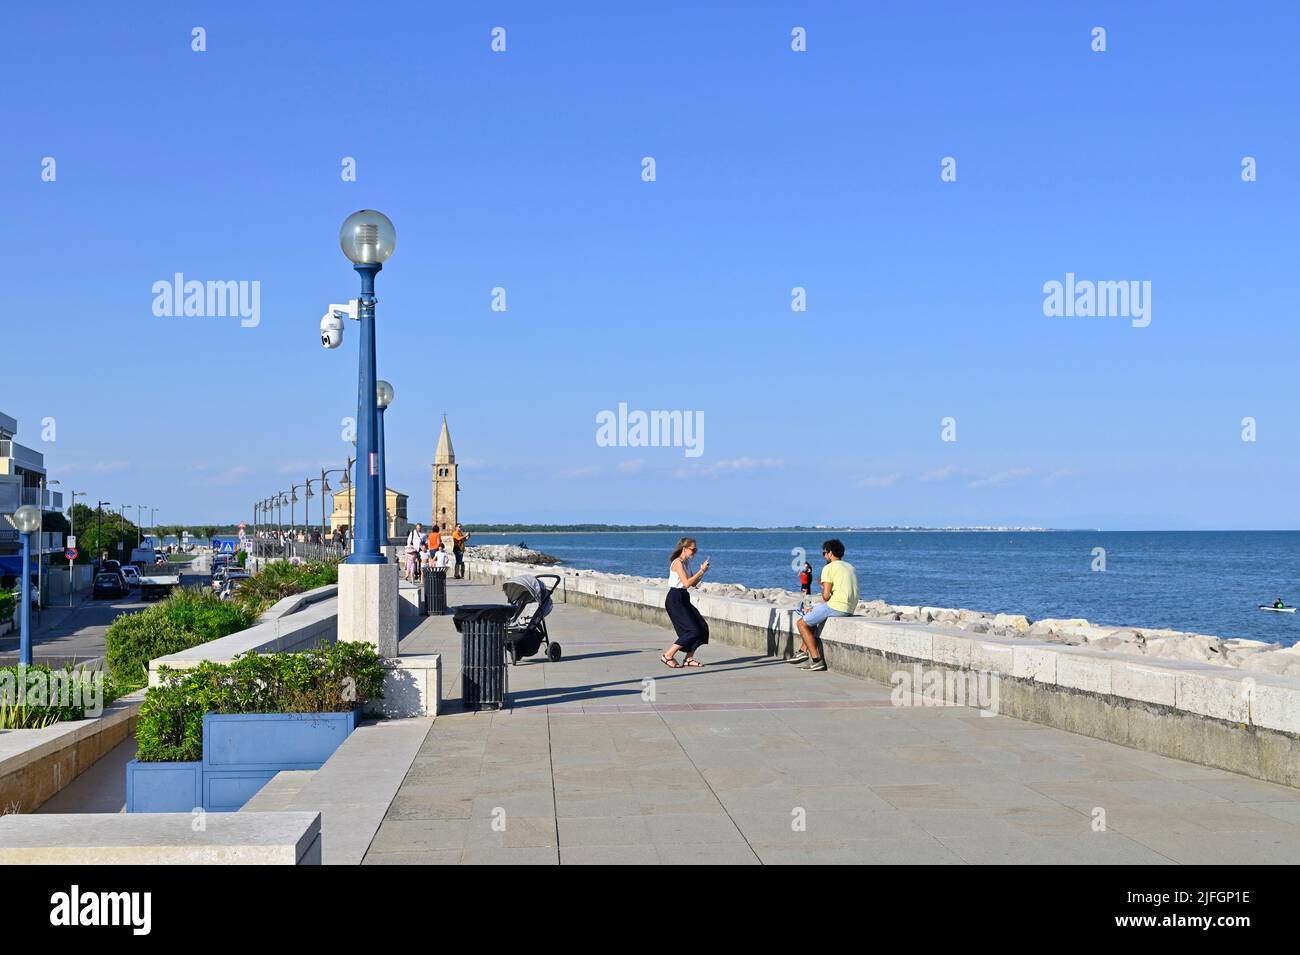 Caorle Italy. Church Madonna dell'Angelo on the pier Stock Photo